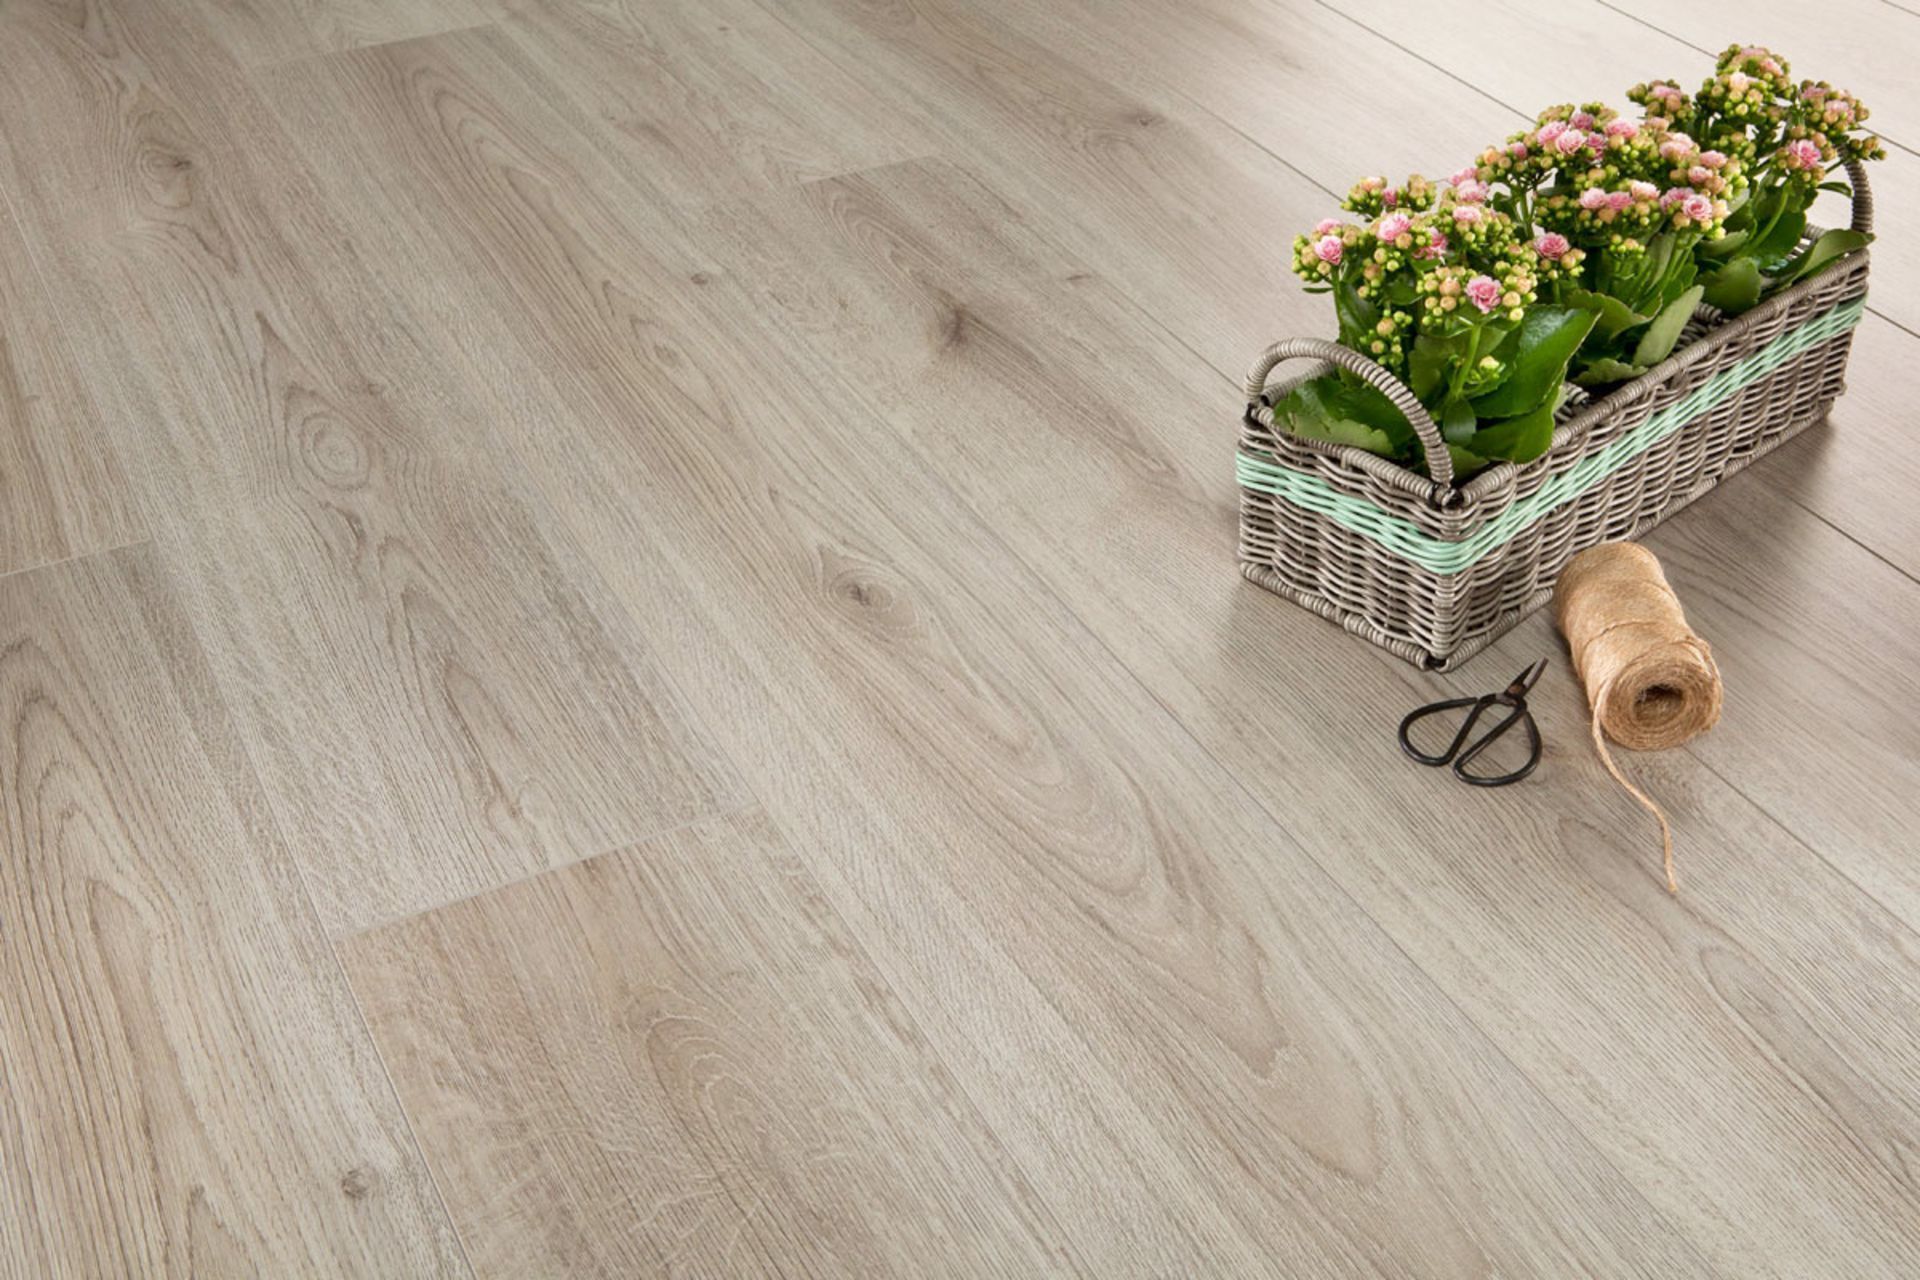 NEW 7.17 Square Meters of LAMINATE FLOORING TREND GREY OAK. With a warm grey hue and an authent...